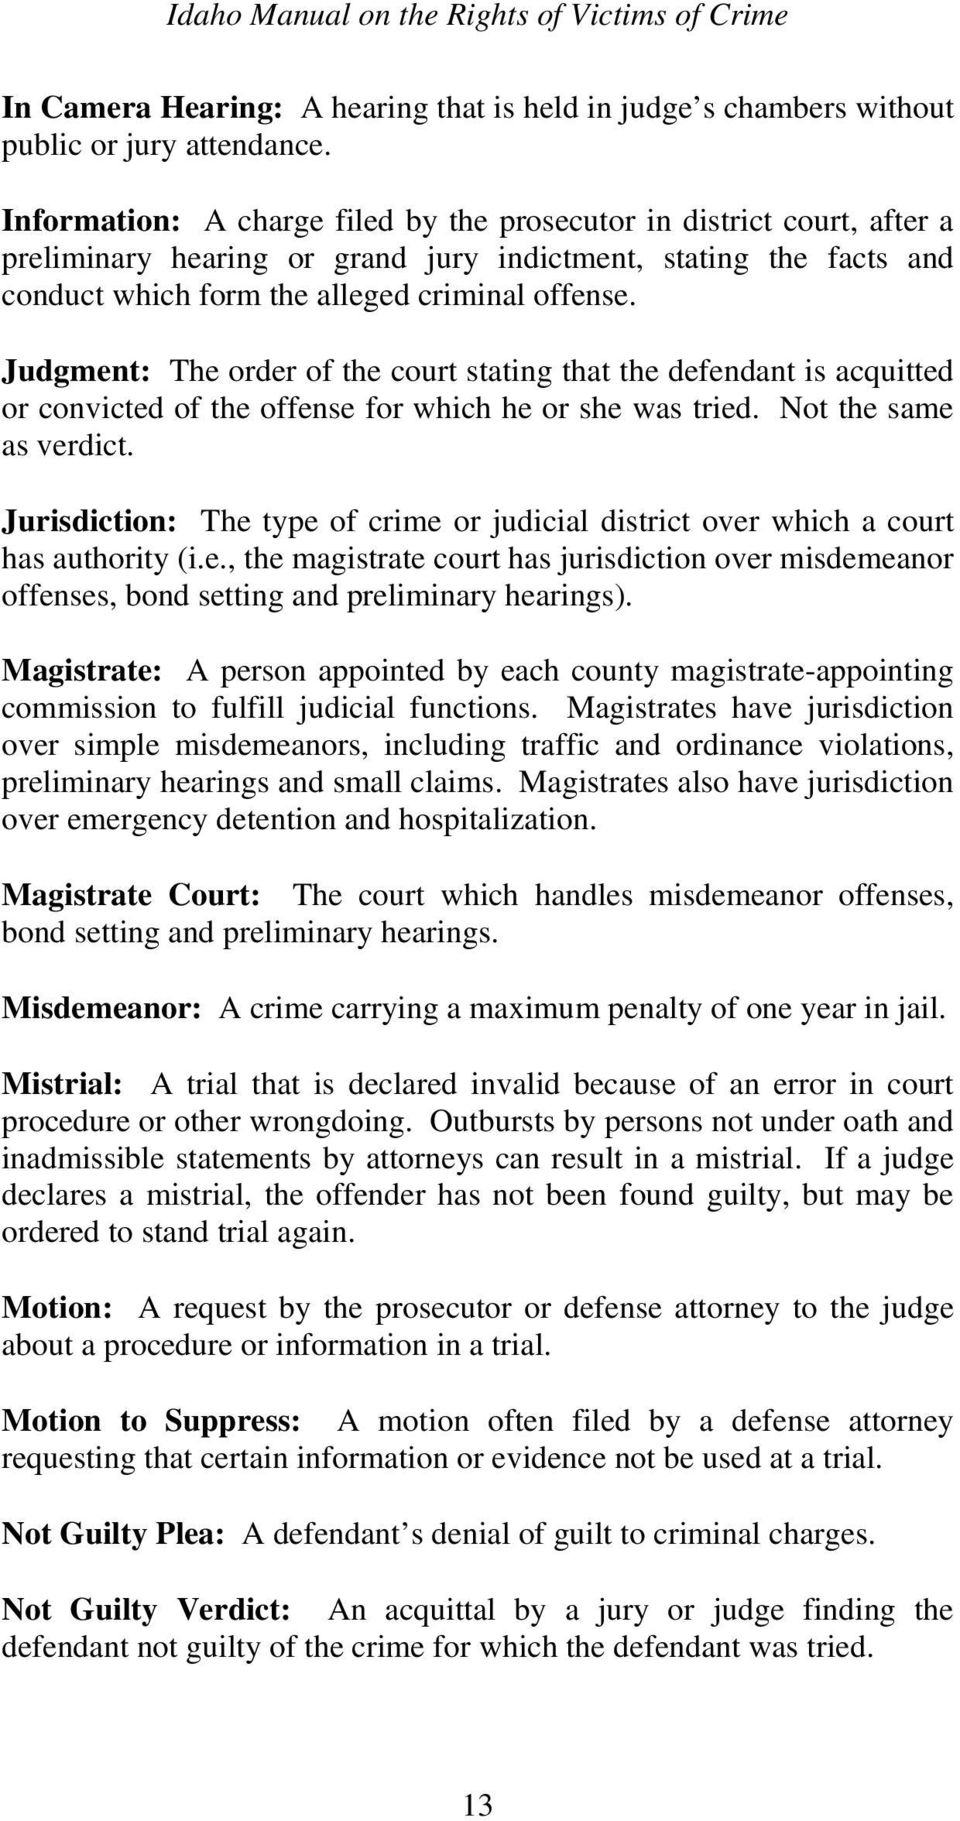 Judgment: The order of the court stating that the defendant is acquitted or convicted of the offense for which he or she was tried. Not the same as verdict.